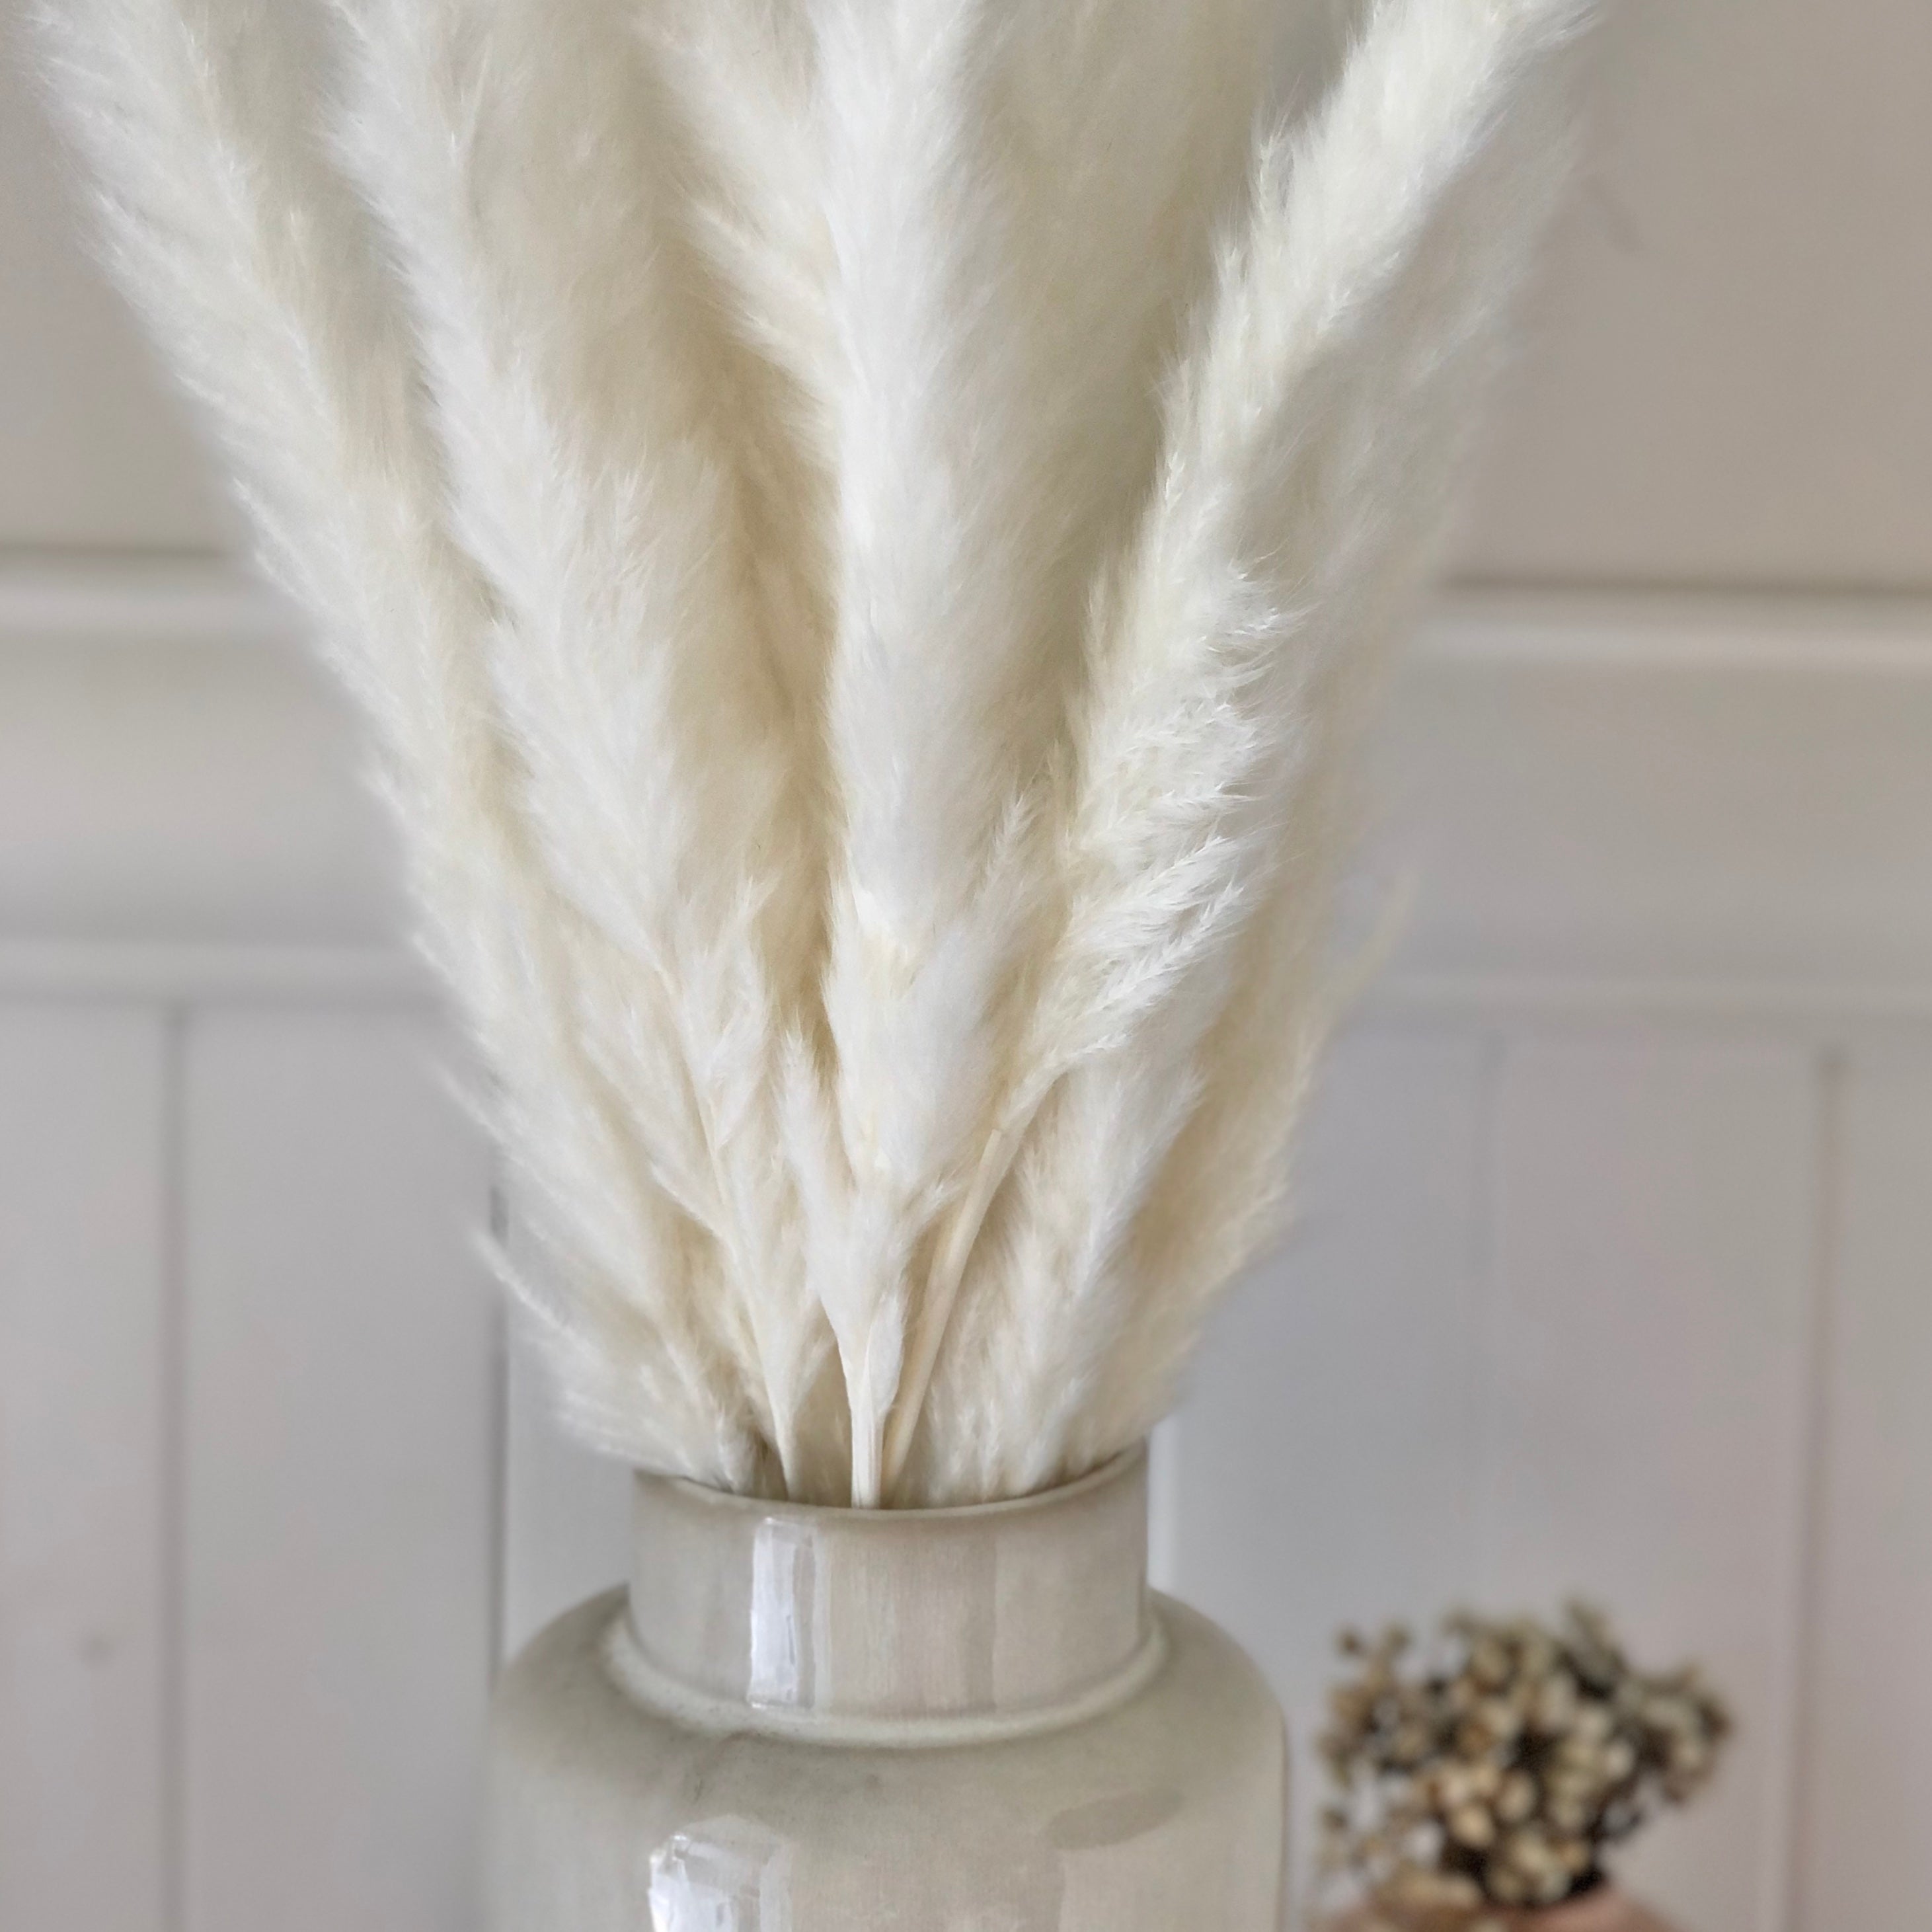 Dried Reed Blady Flower Grass 50-60cm Stem - Natural White